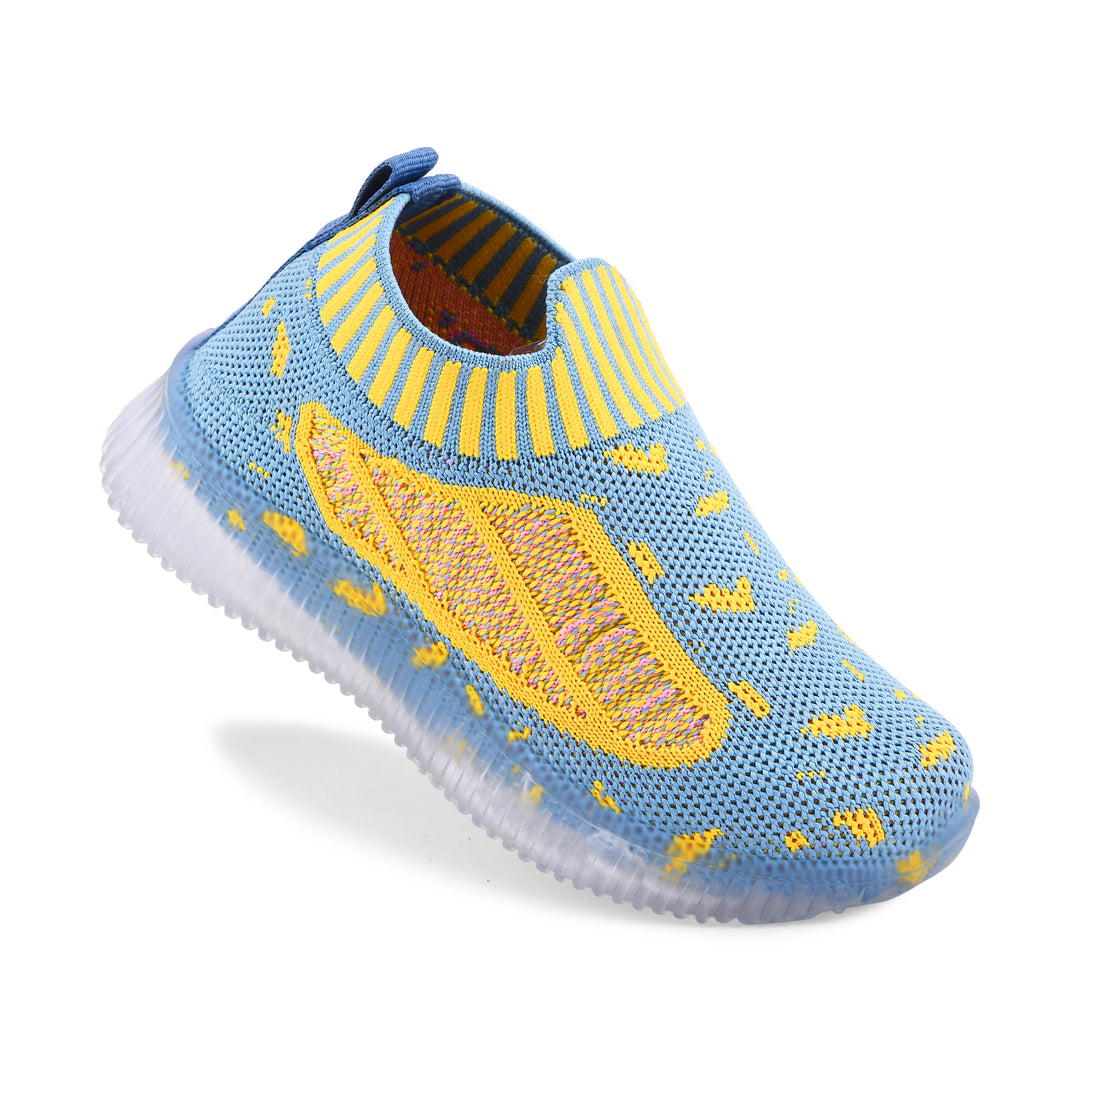 KATS GLOW-6 Baby Boys and Girls KNITTED LED Light Casual Shoes (2 Years to 5 Years) katsfootwear